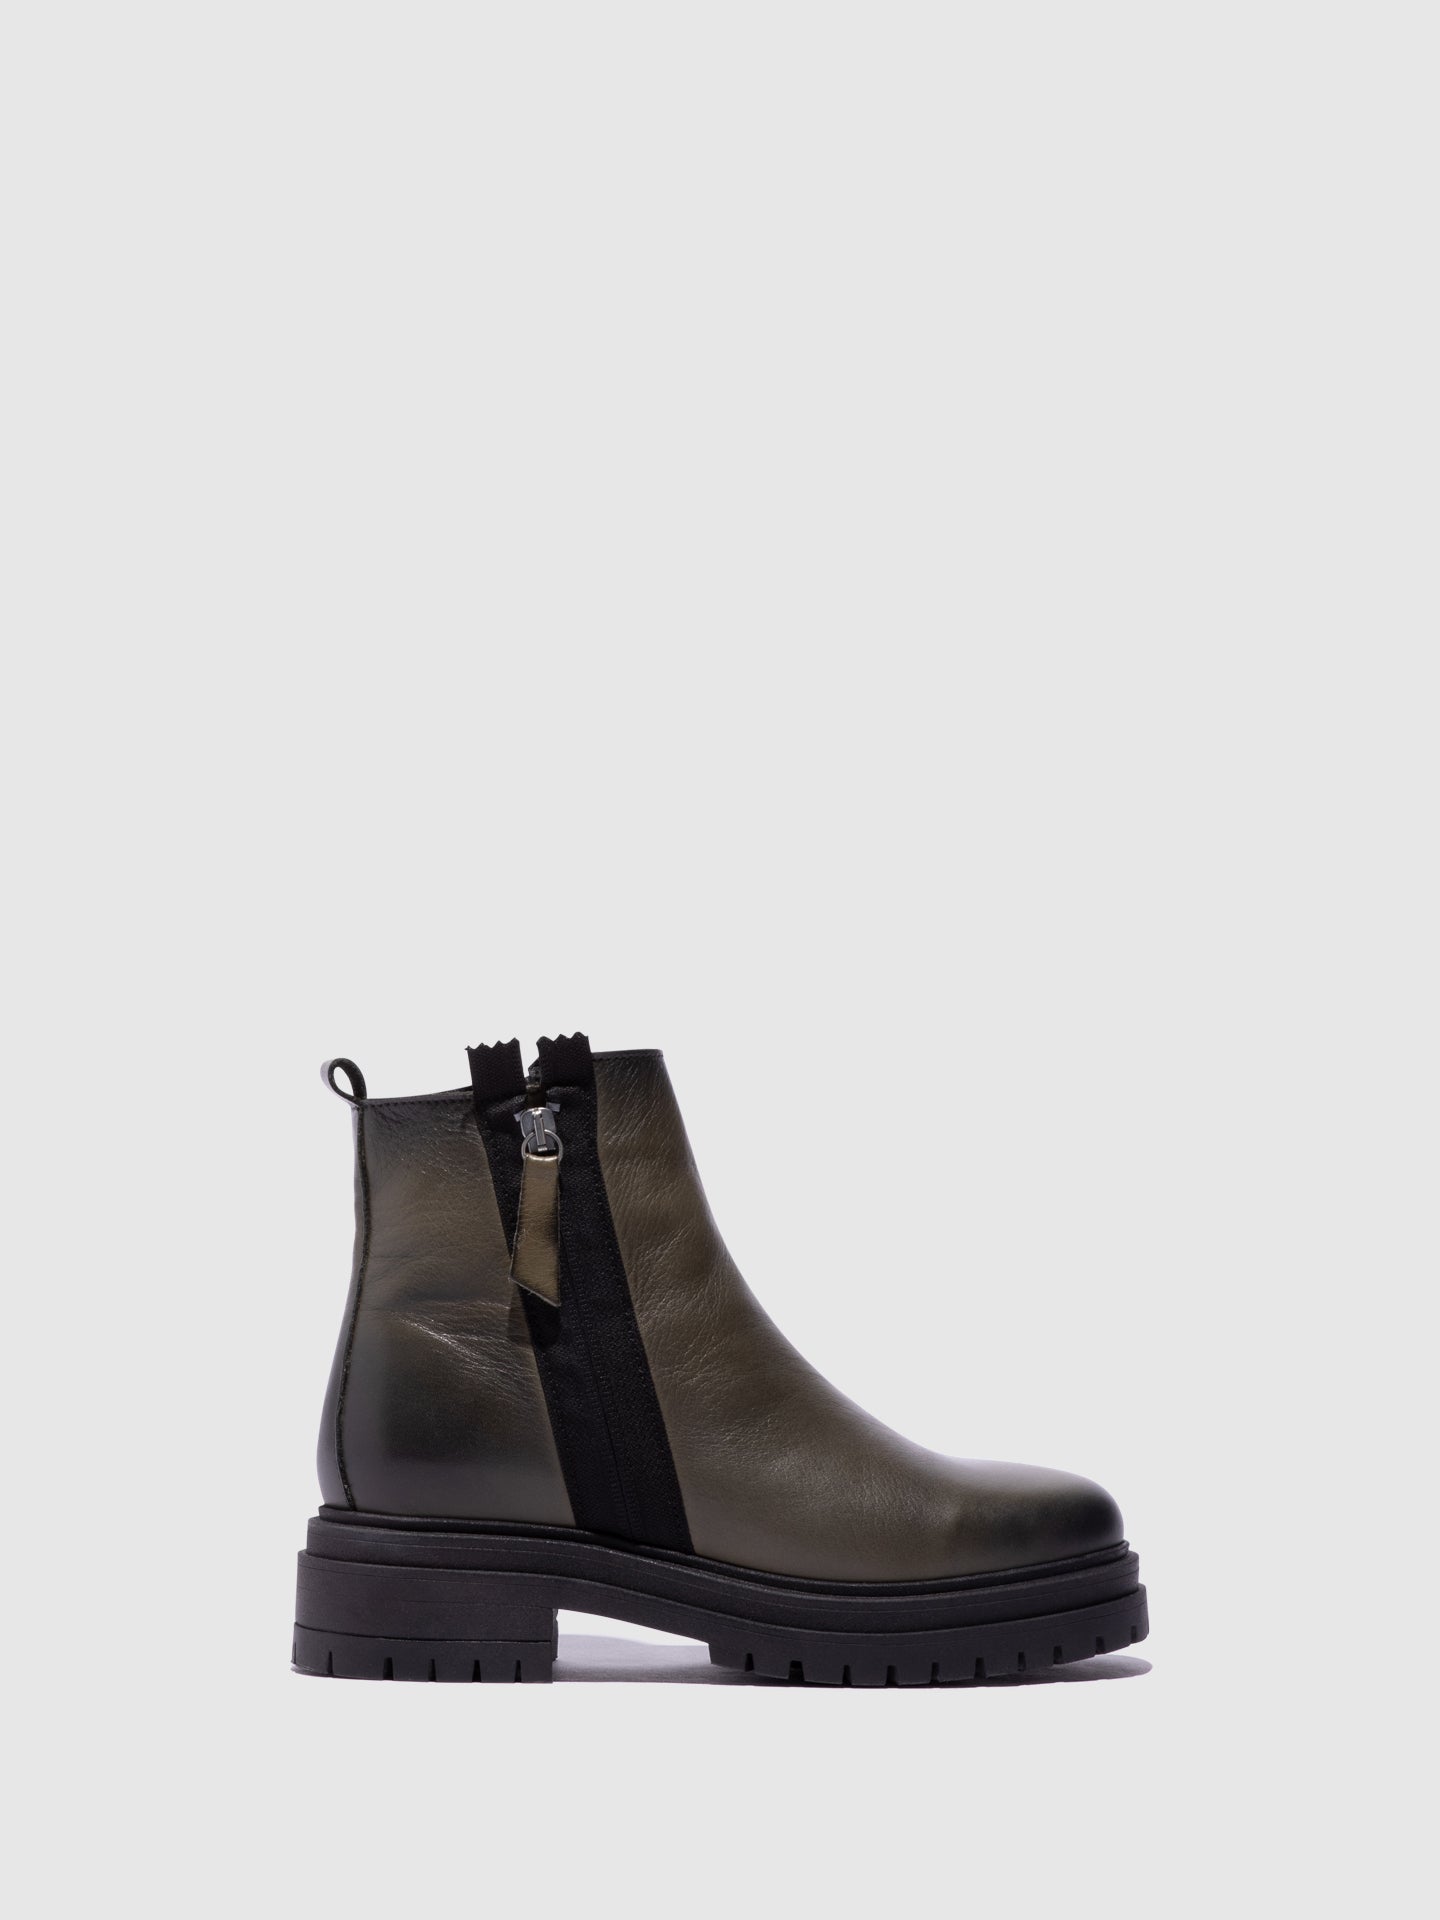 Foreva Green Zip Up Ankle Boots